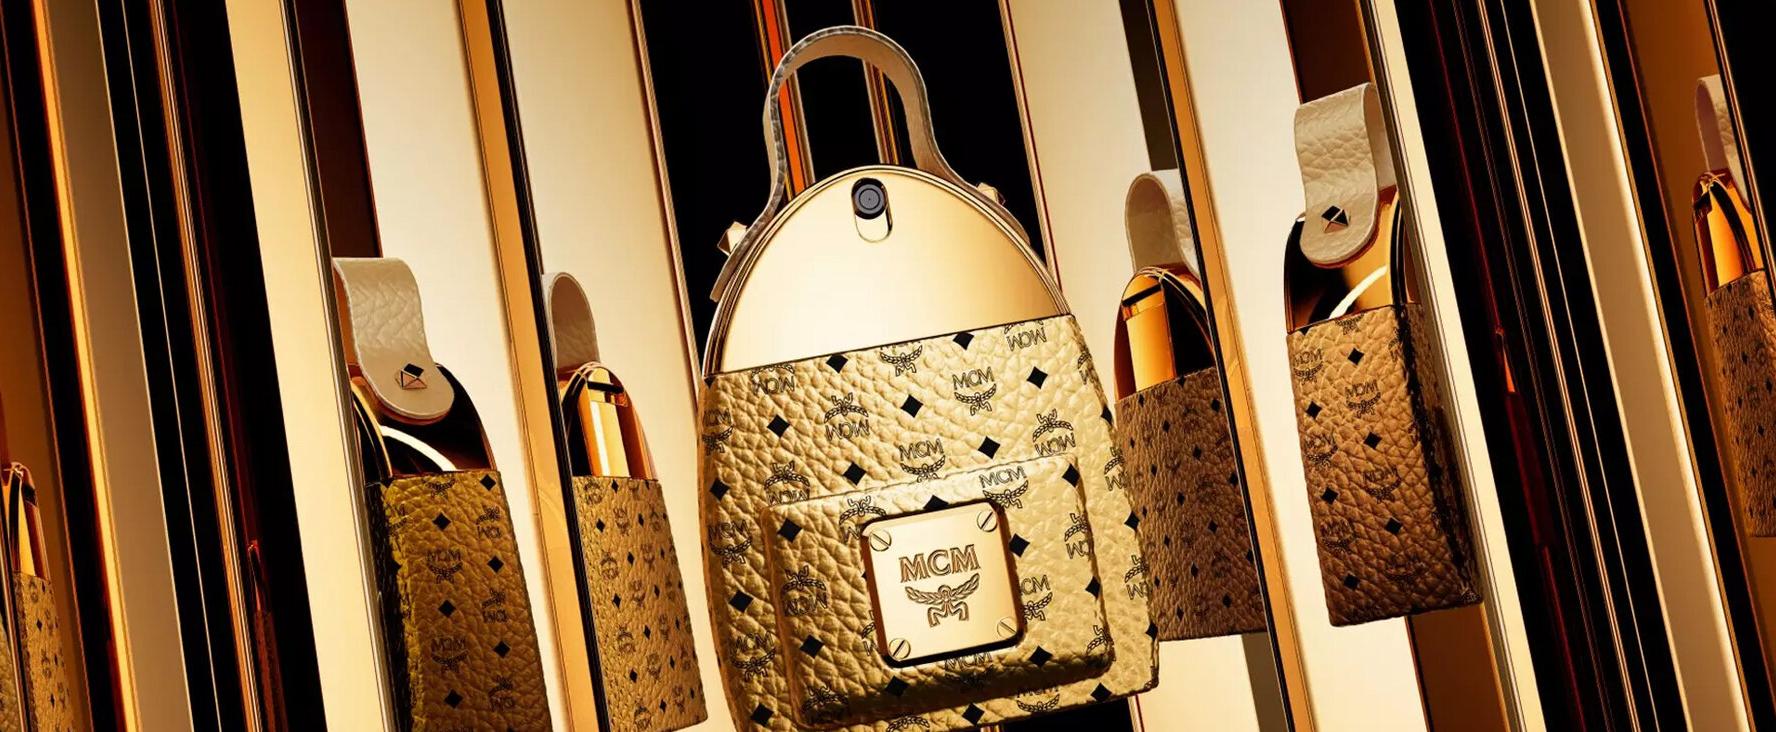 Fashion label MCM launches new fragrance "MCM Ultra"